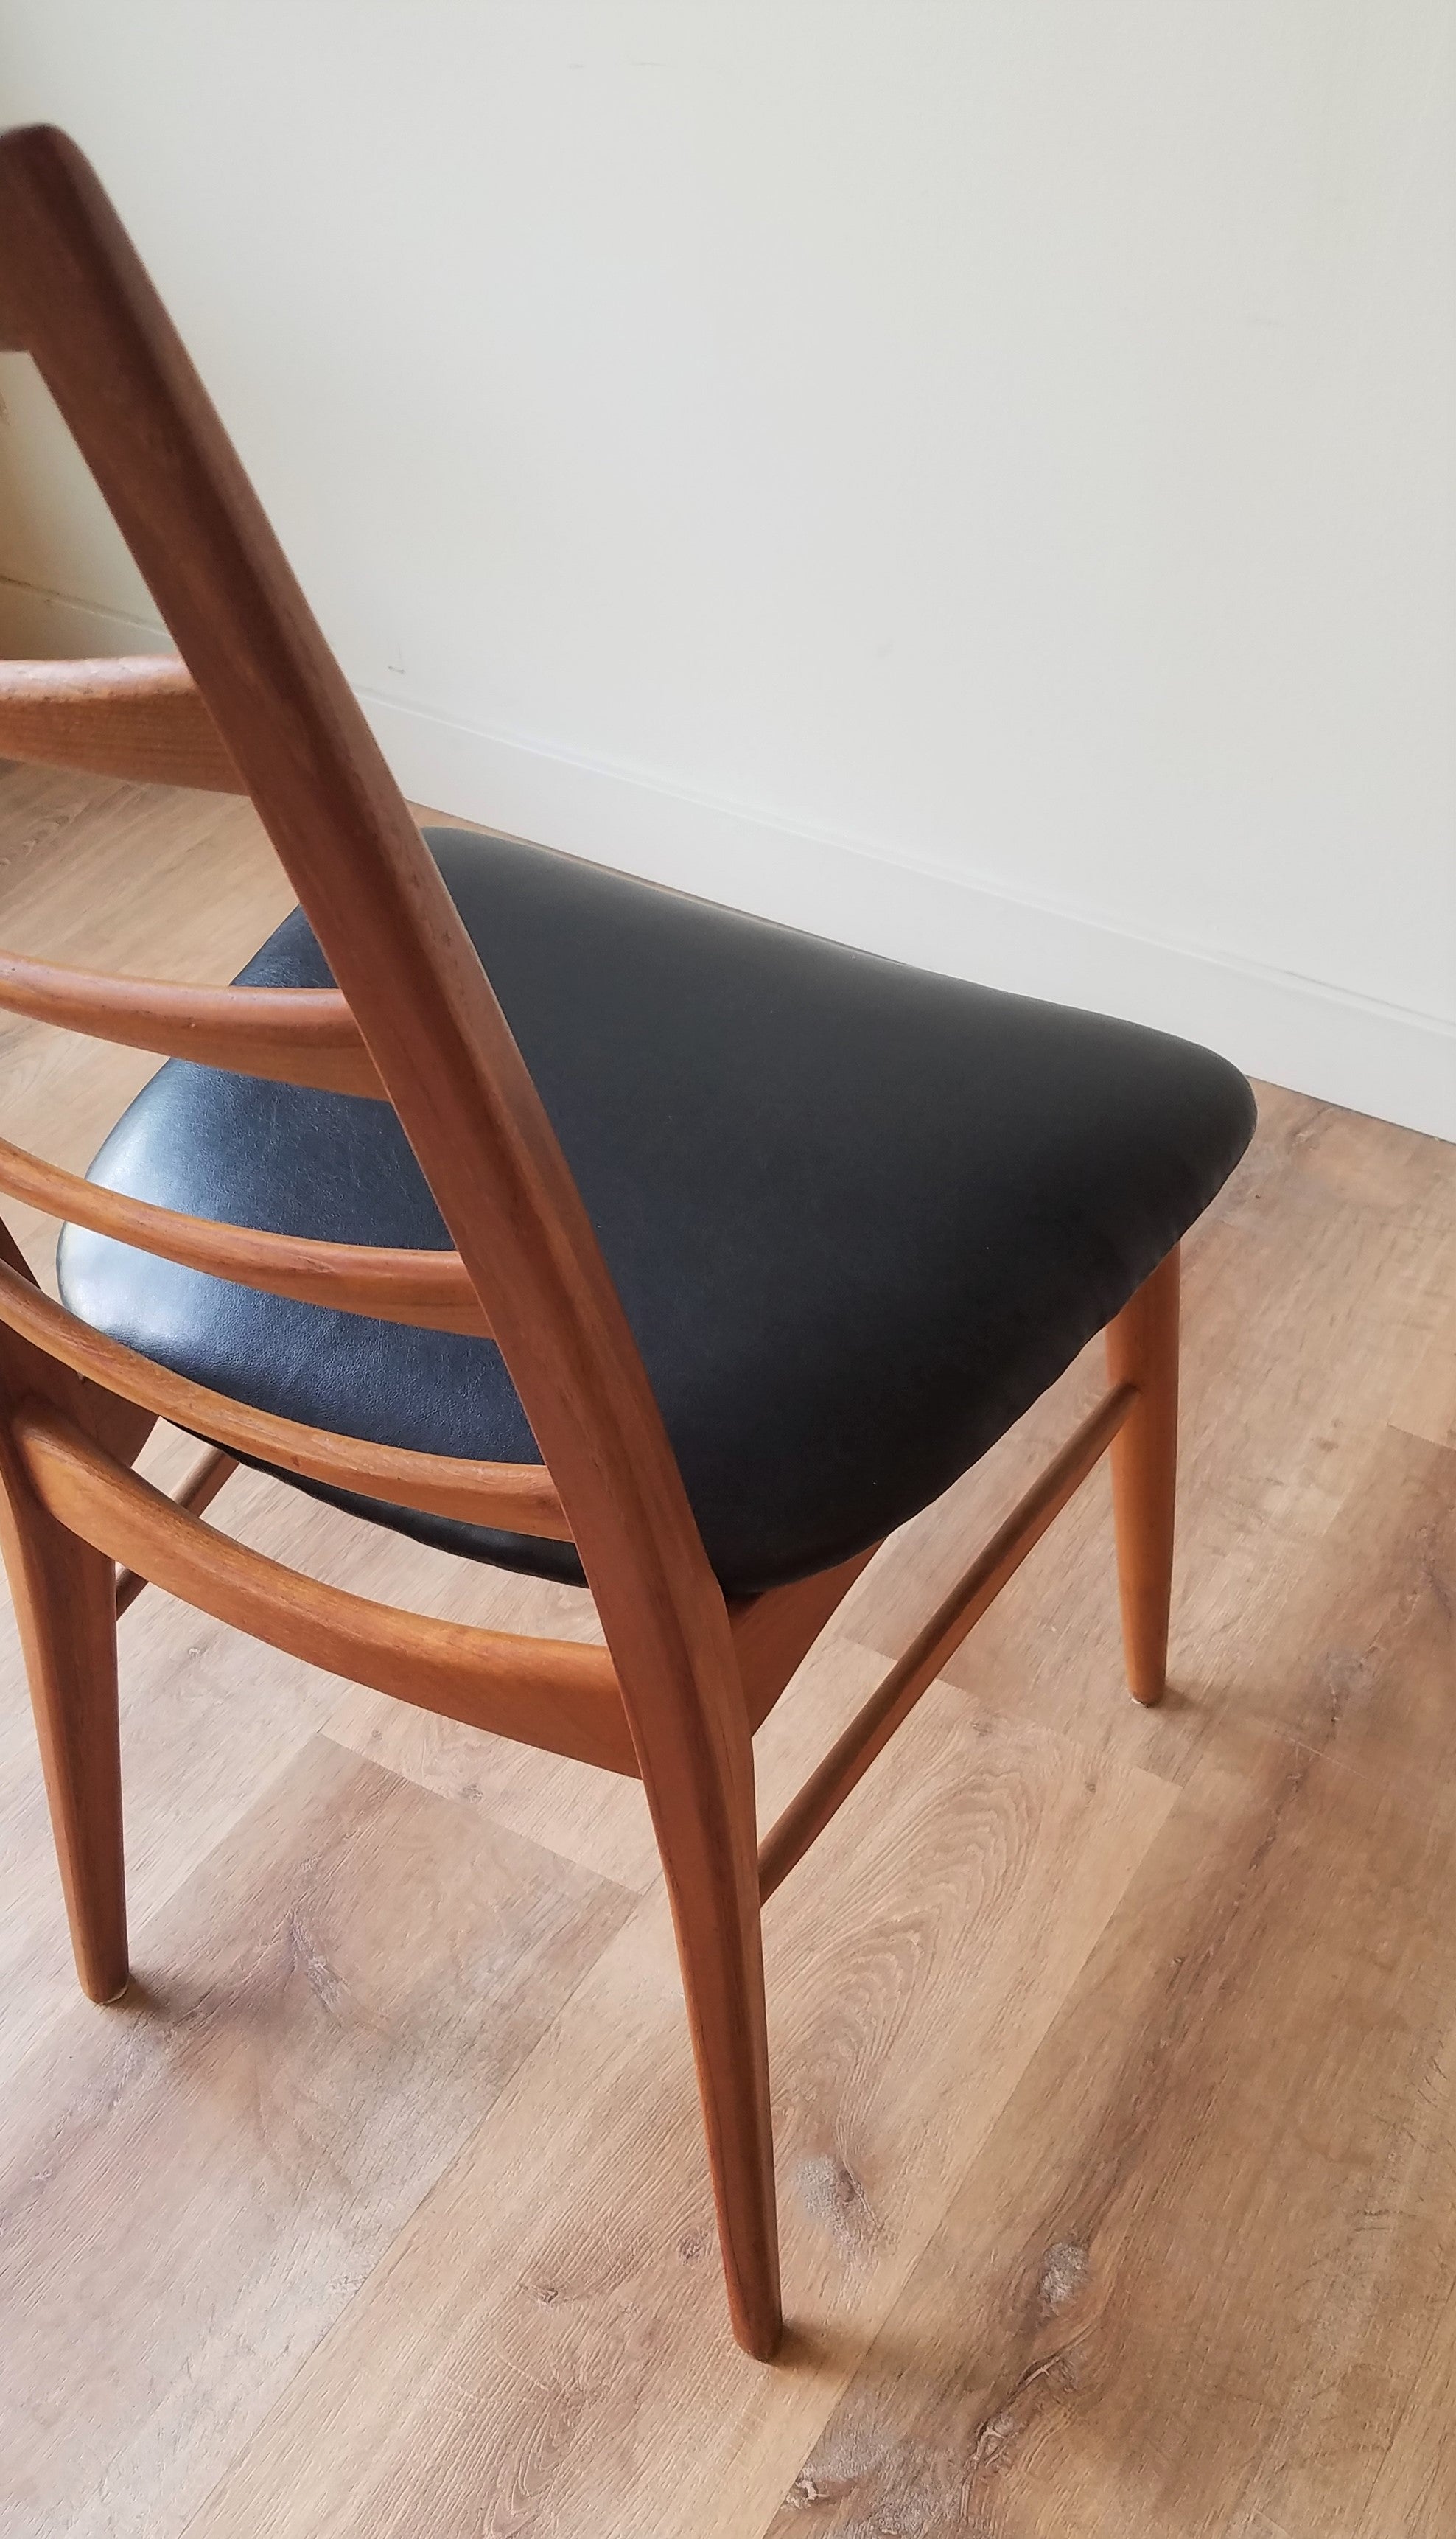 Niels Kofoed 'Lis' Ladder Back Dining Chairs -  a pair